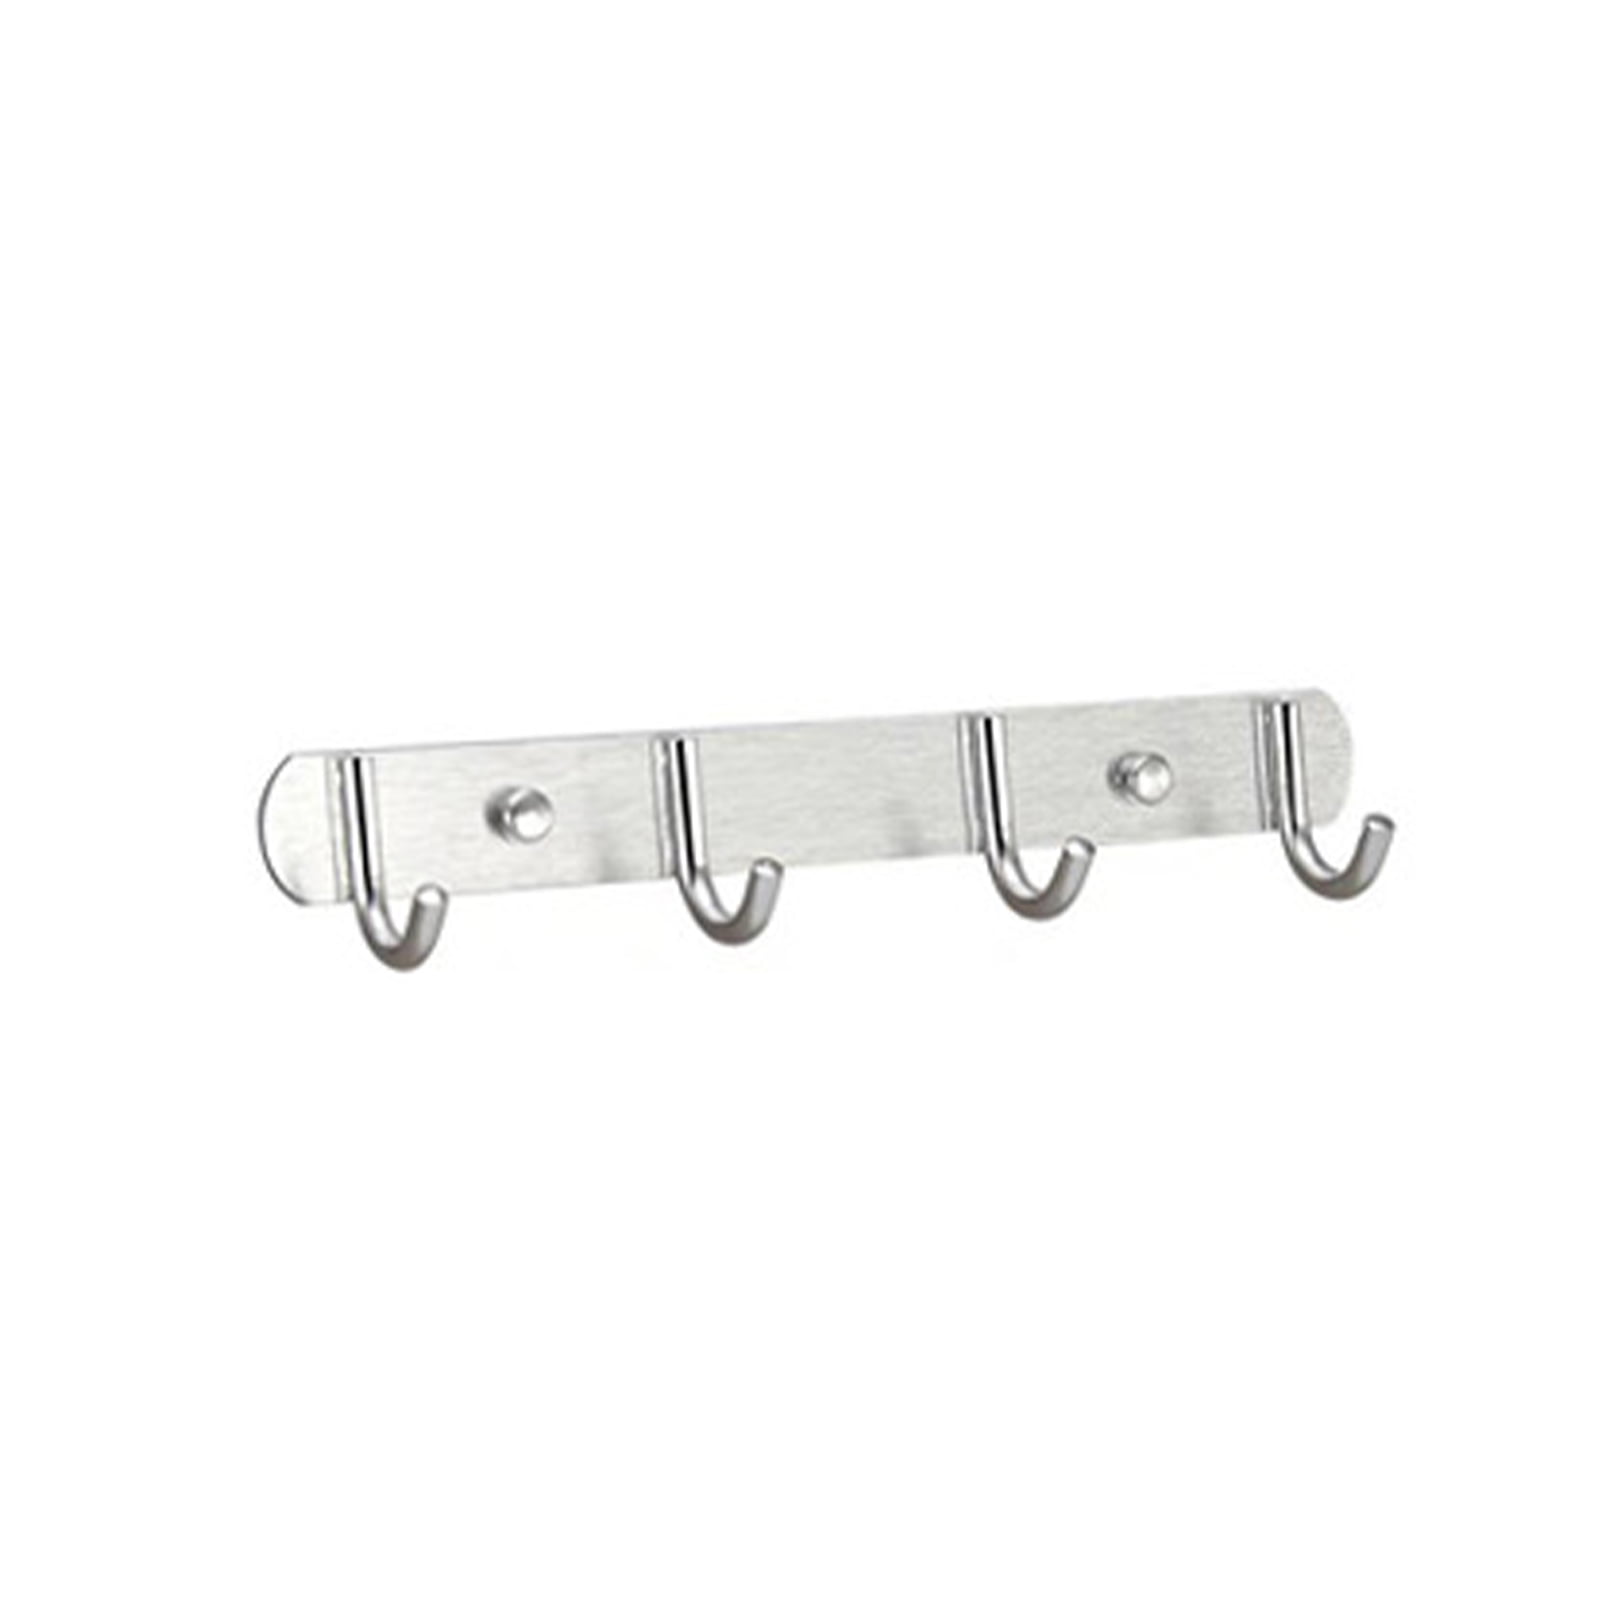 Cubicle Wire Double Coat Hook New High Strength 1pc 